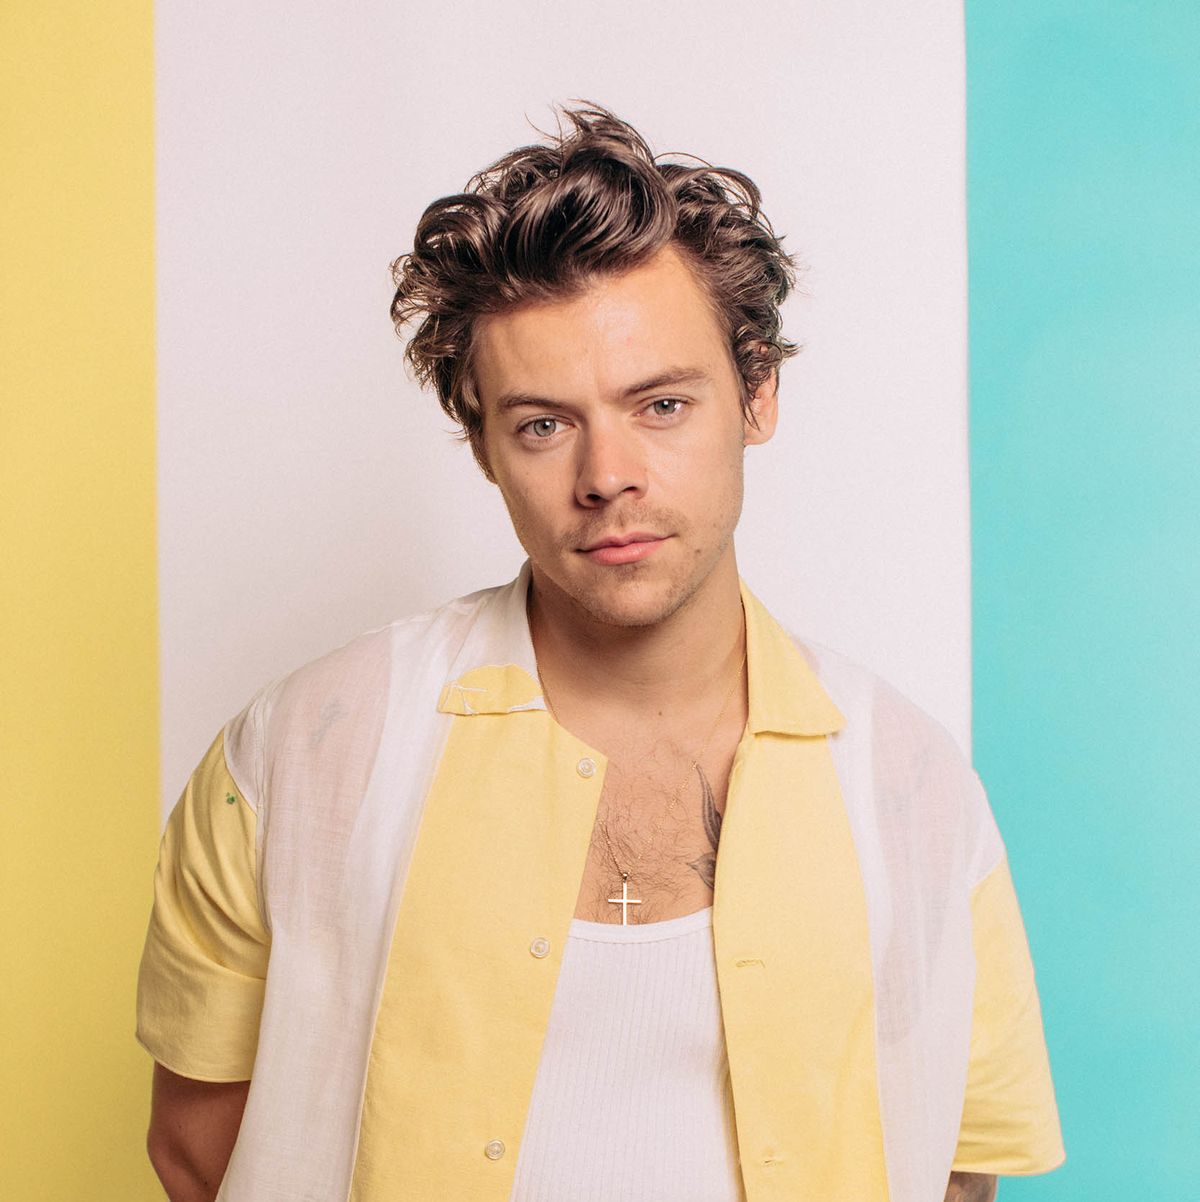 Harry Styles 'Fine Line' Album Review: He's Redefining Manhood for 2020